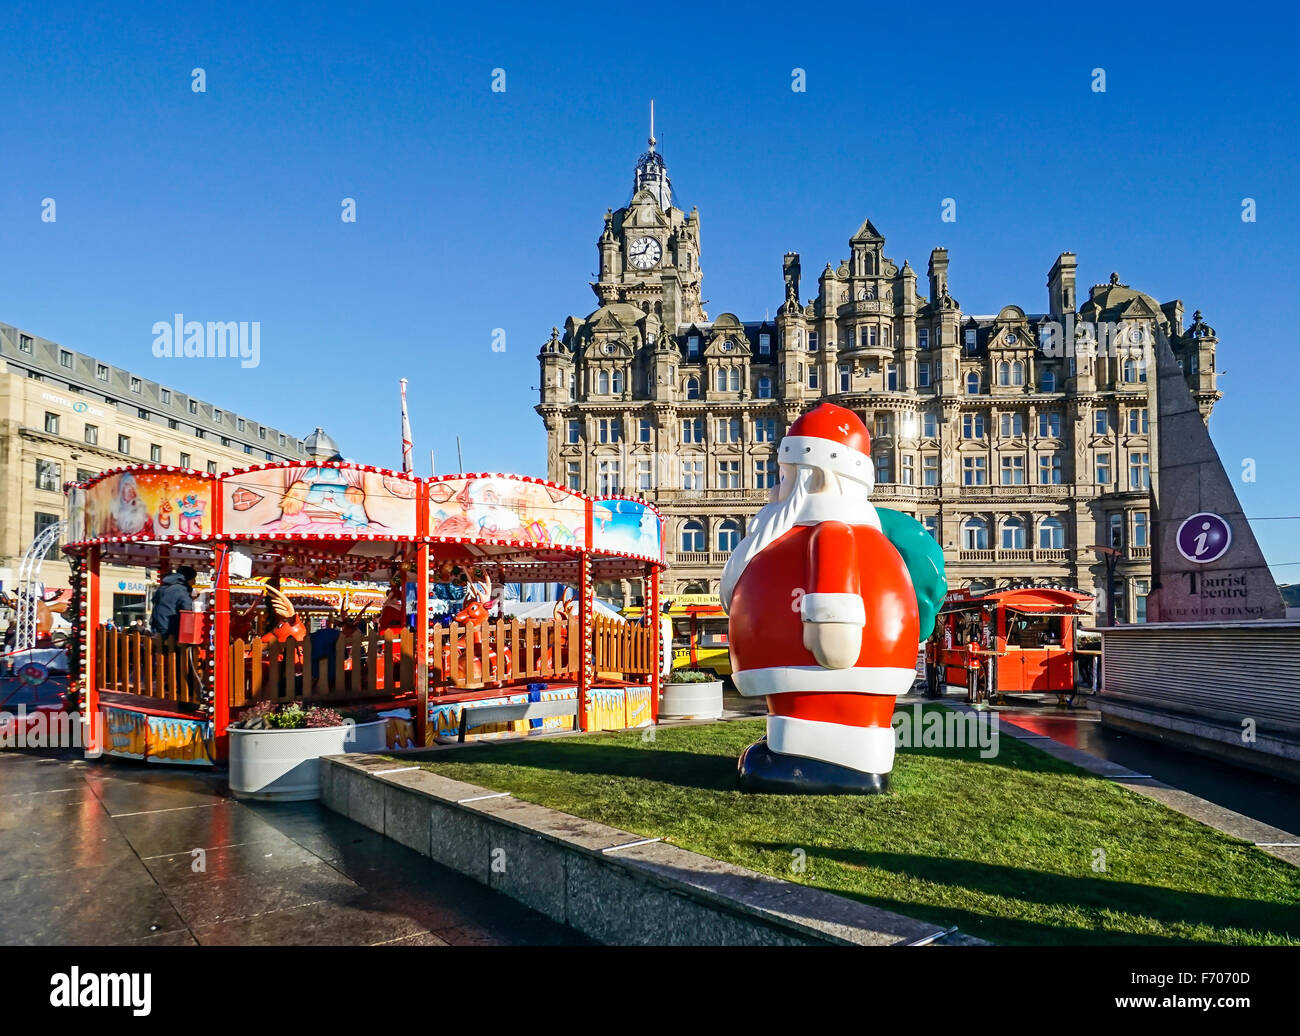 Edinburgh Christmas market 2015 on top of Waverley Shopping Centre with Santa Claus and sleigh ride Stock Photo